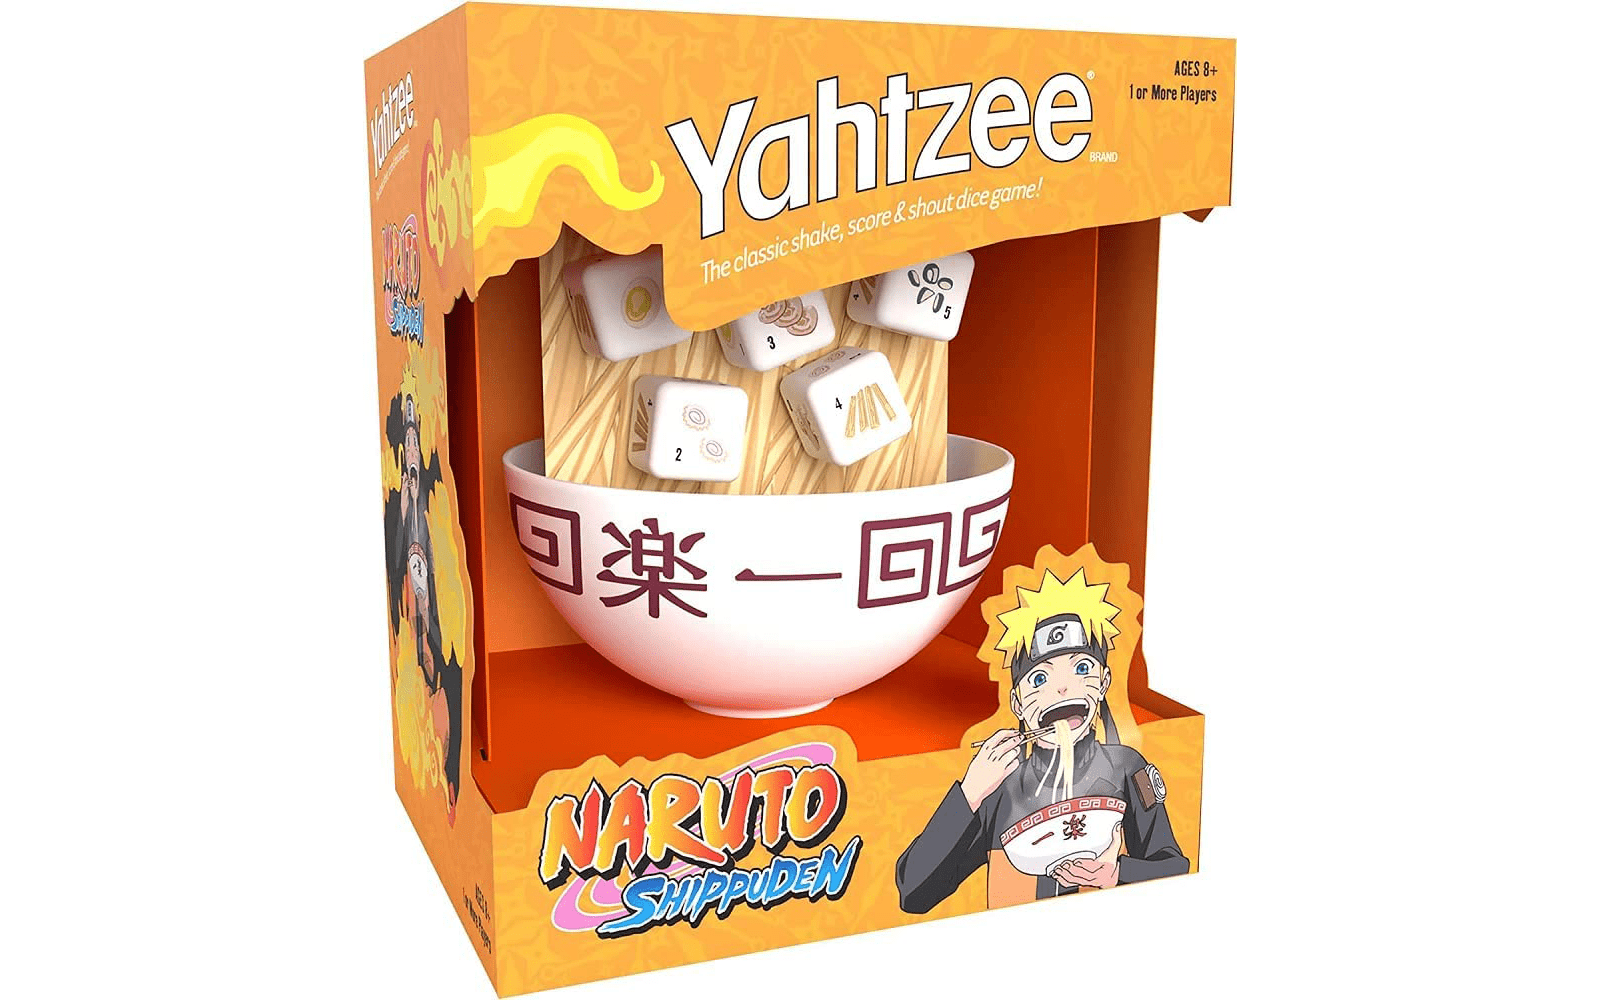 Header showing an orange box with 5 dice and a cup inside. The top reads "Yahtzee" the bottom says "Naruto Shippuden" with a cutout image of Naruto Uzamaki eating ramen.